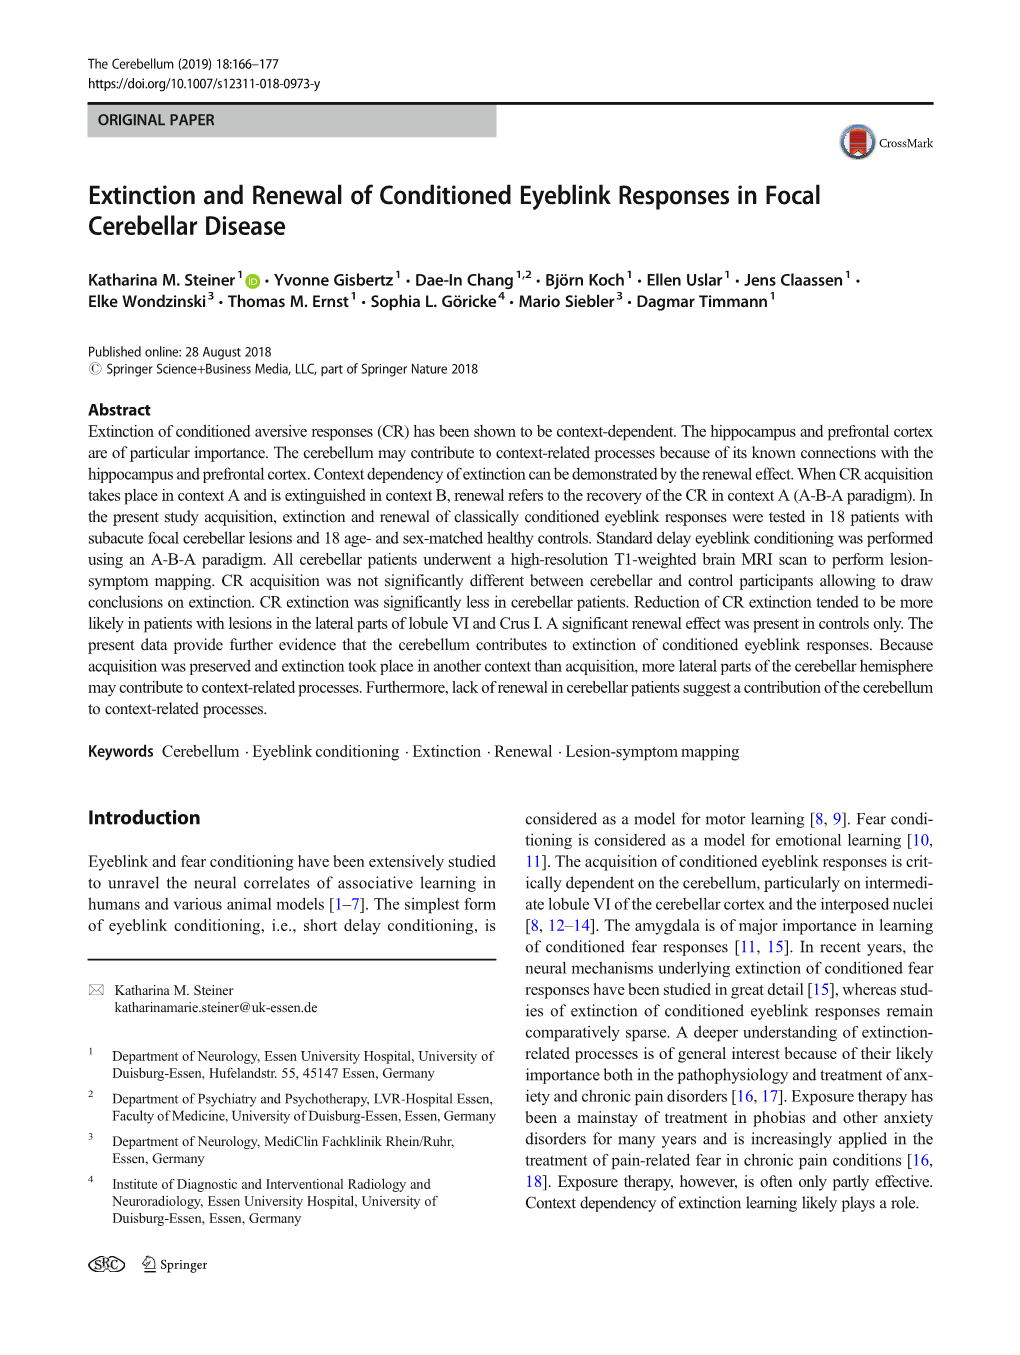 Extinction and Renewal of Conditioned Eyeblink Responses in Focal Cerebellar Disease